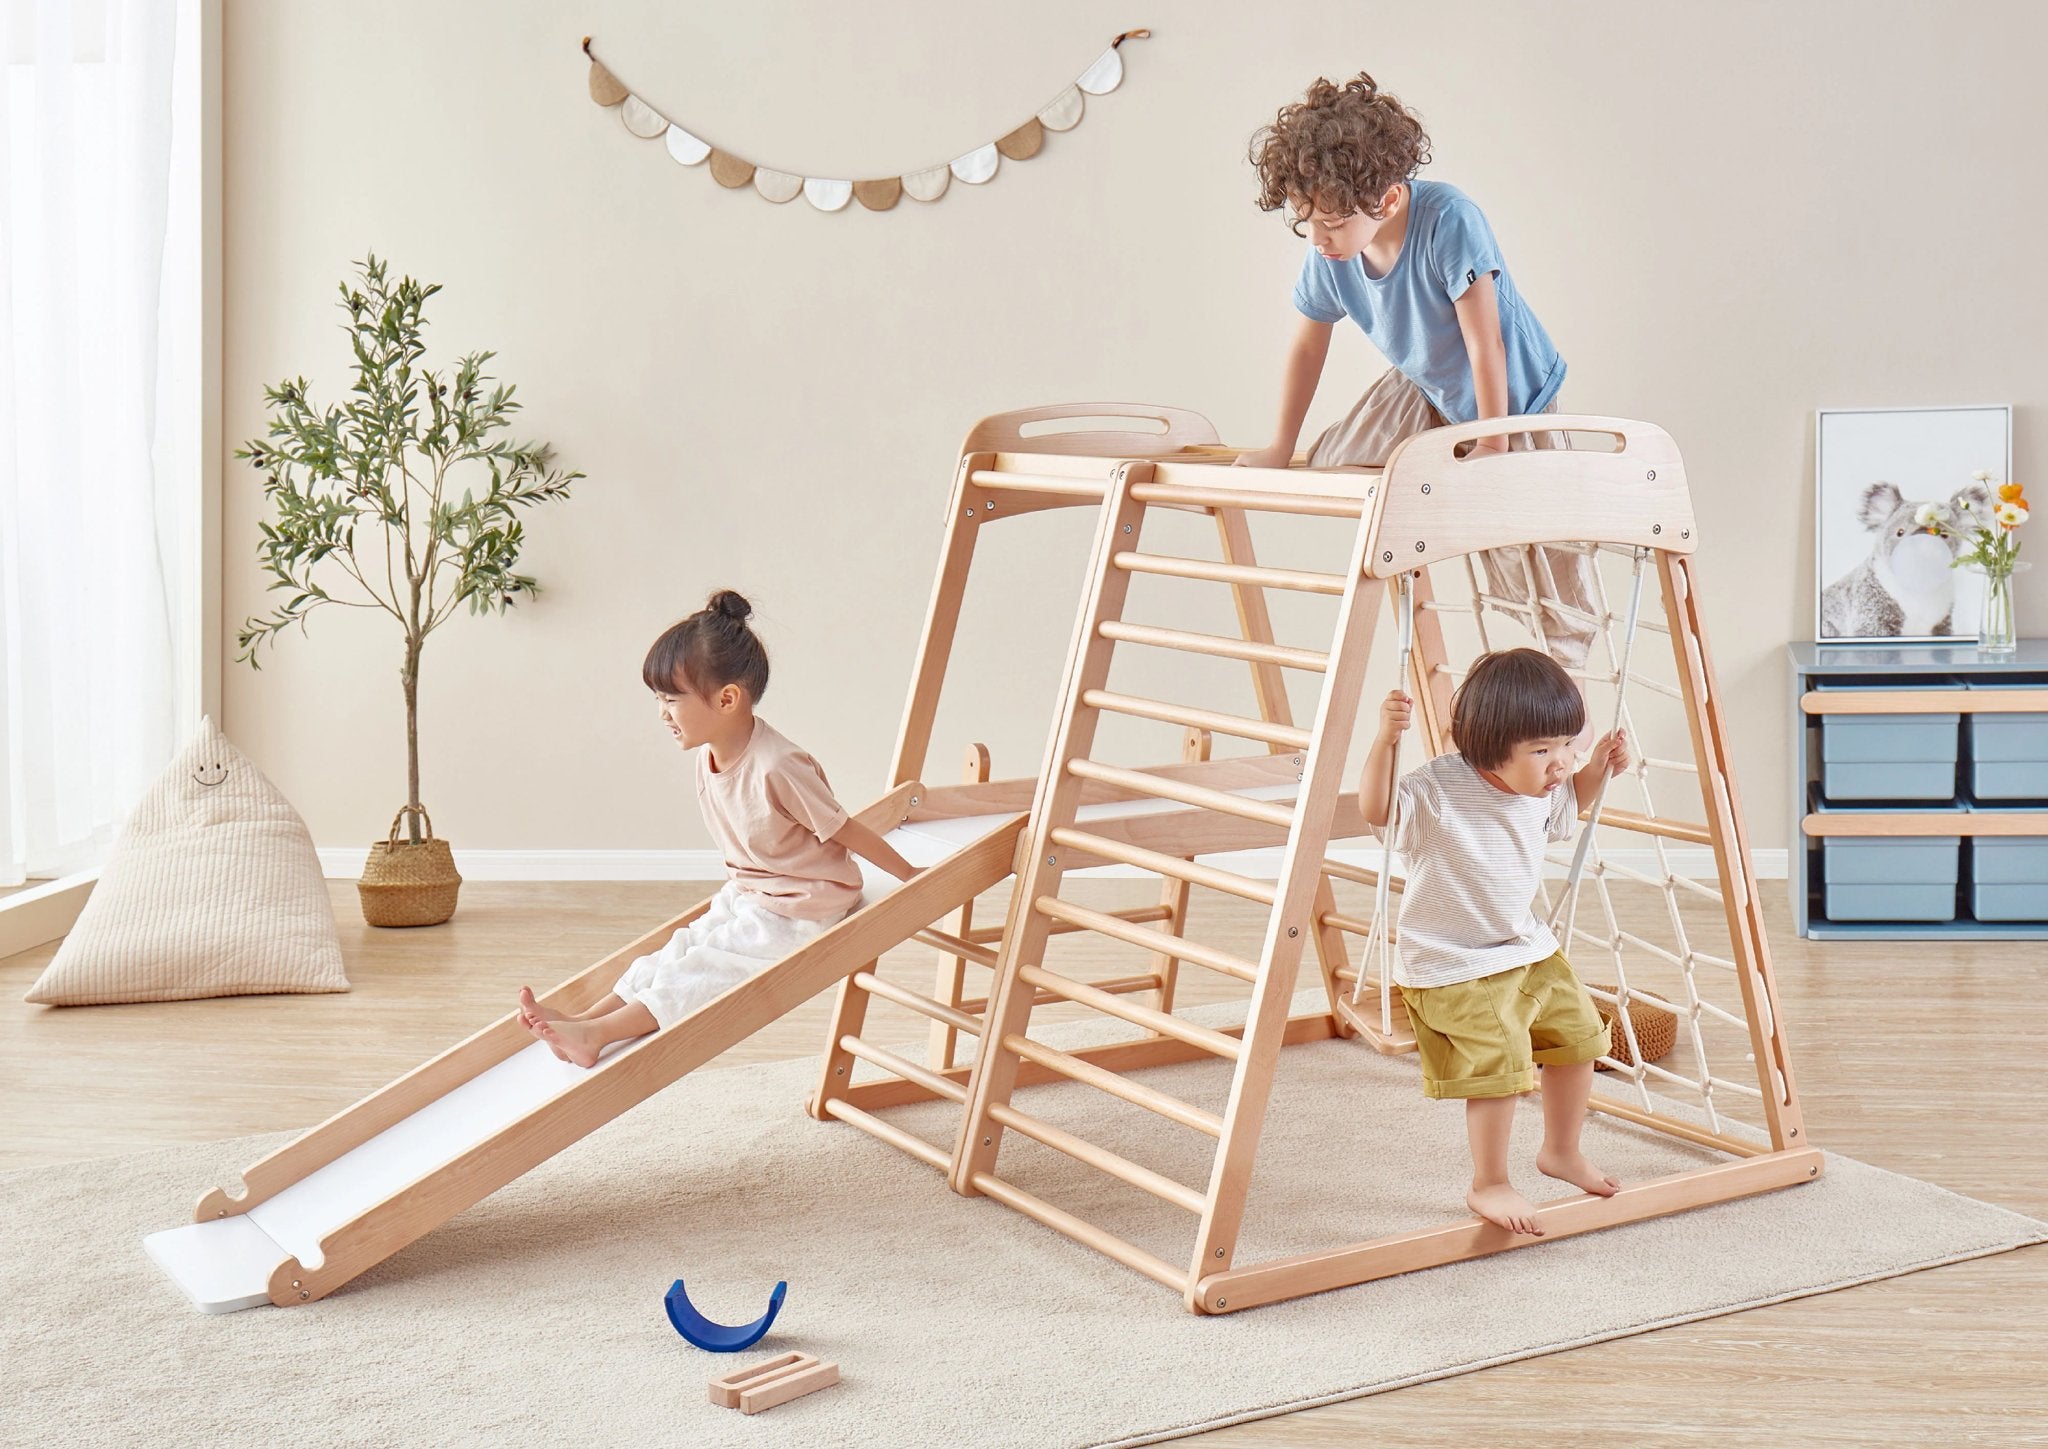 3 children play on indoor climbing gym in playroom